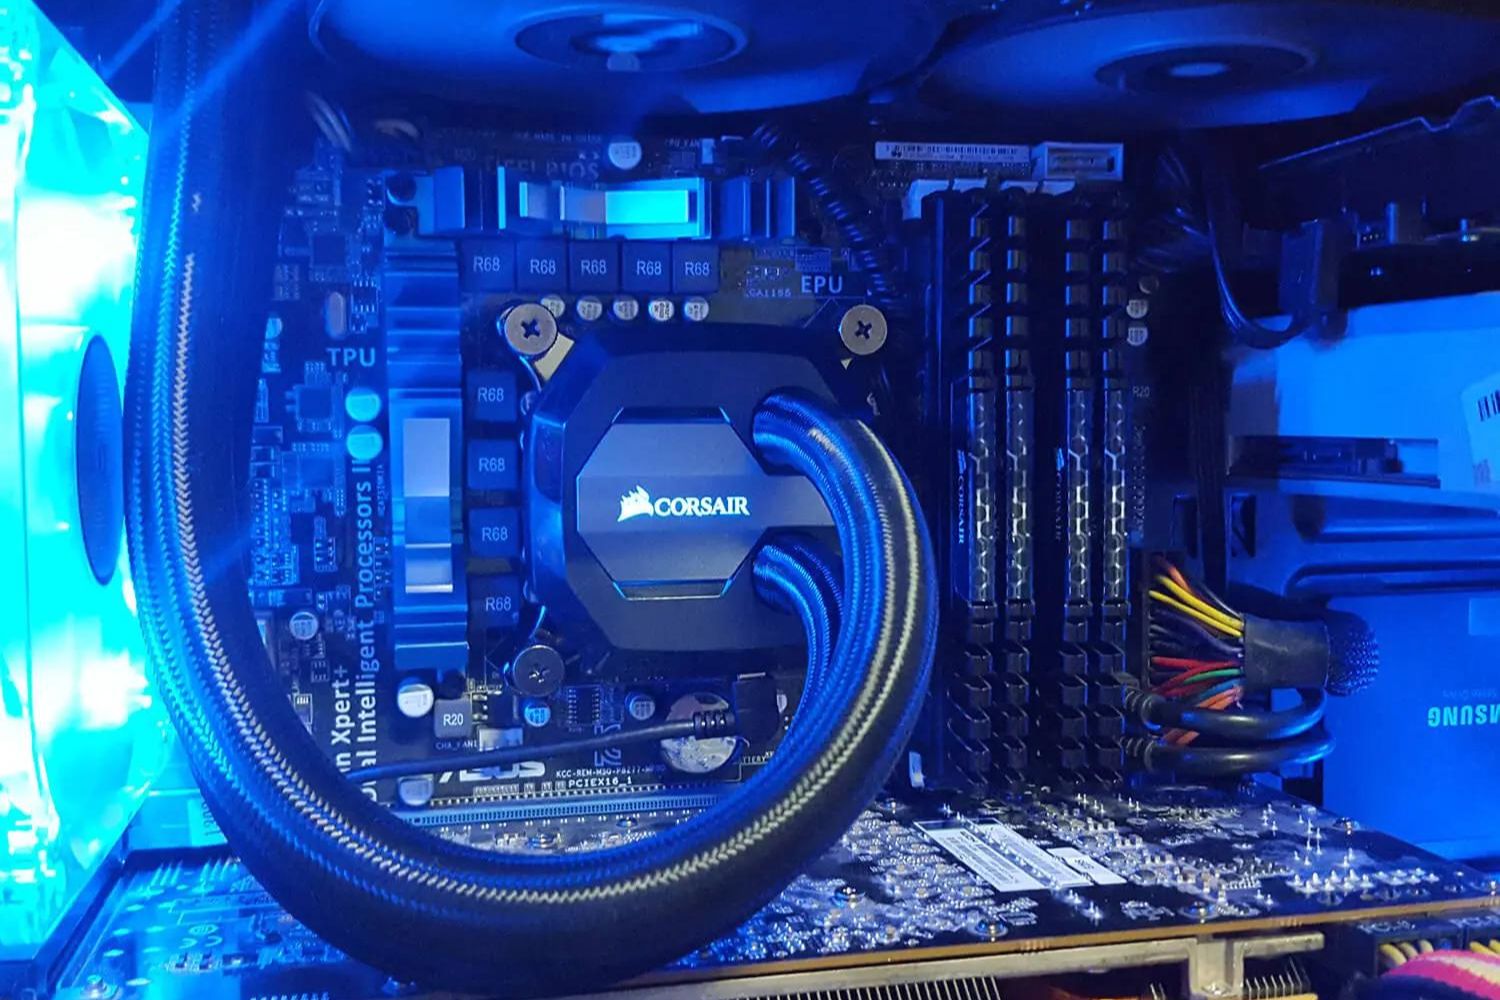 How To Install Corsair Hydro Series H100I V2 Extreme Performance Liquid CPU Cooler